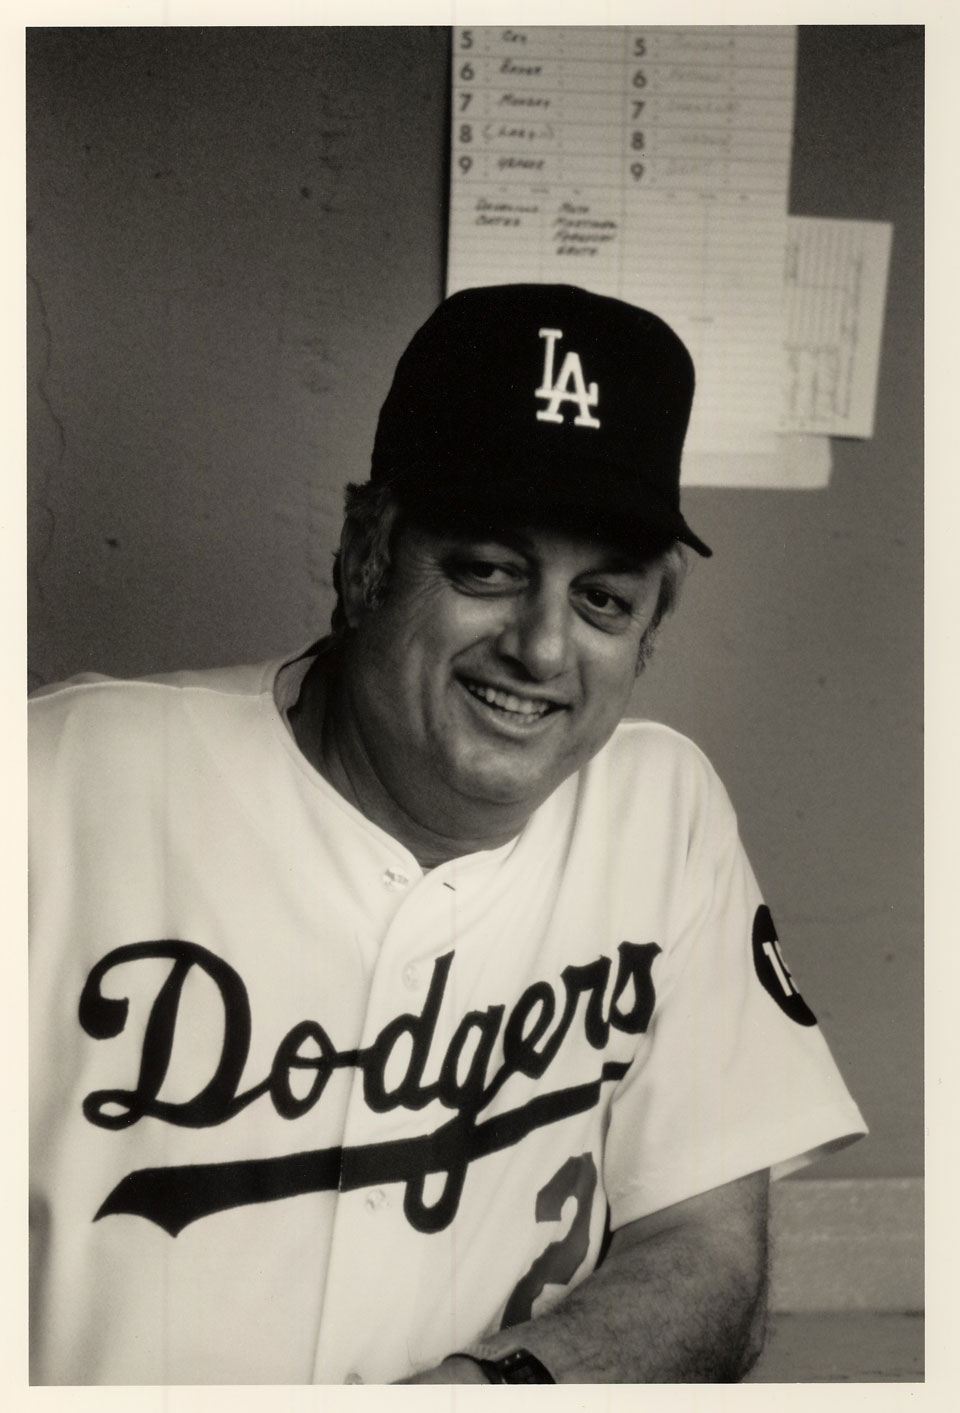 Lasorda managed the Dodgers to World Series titles in 1981 and 1988.